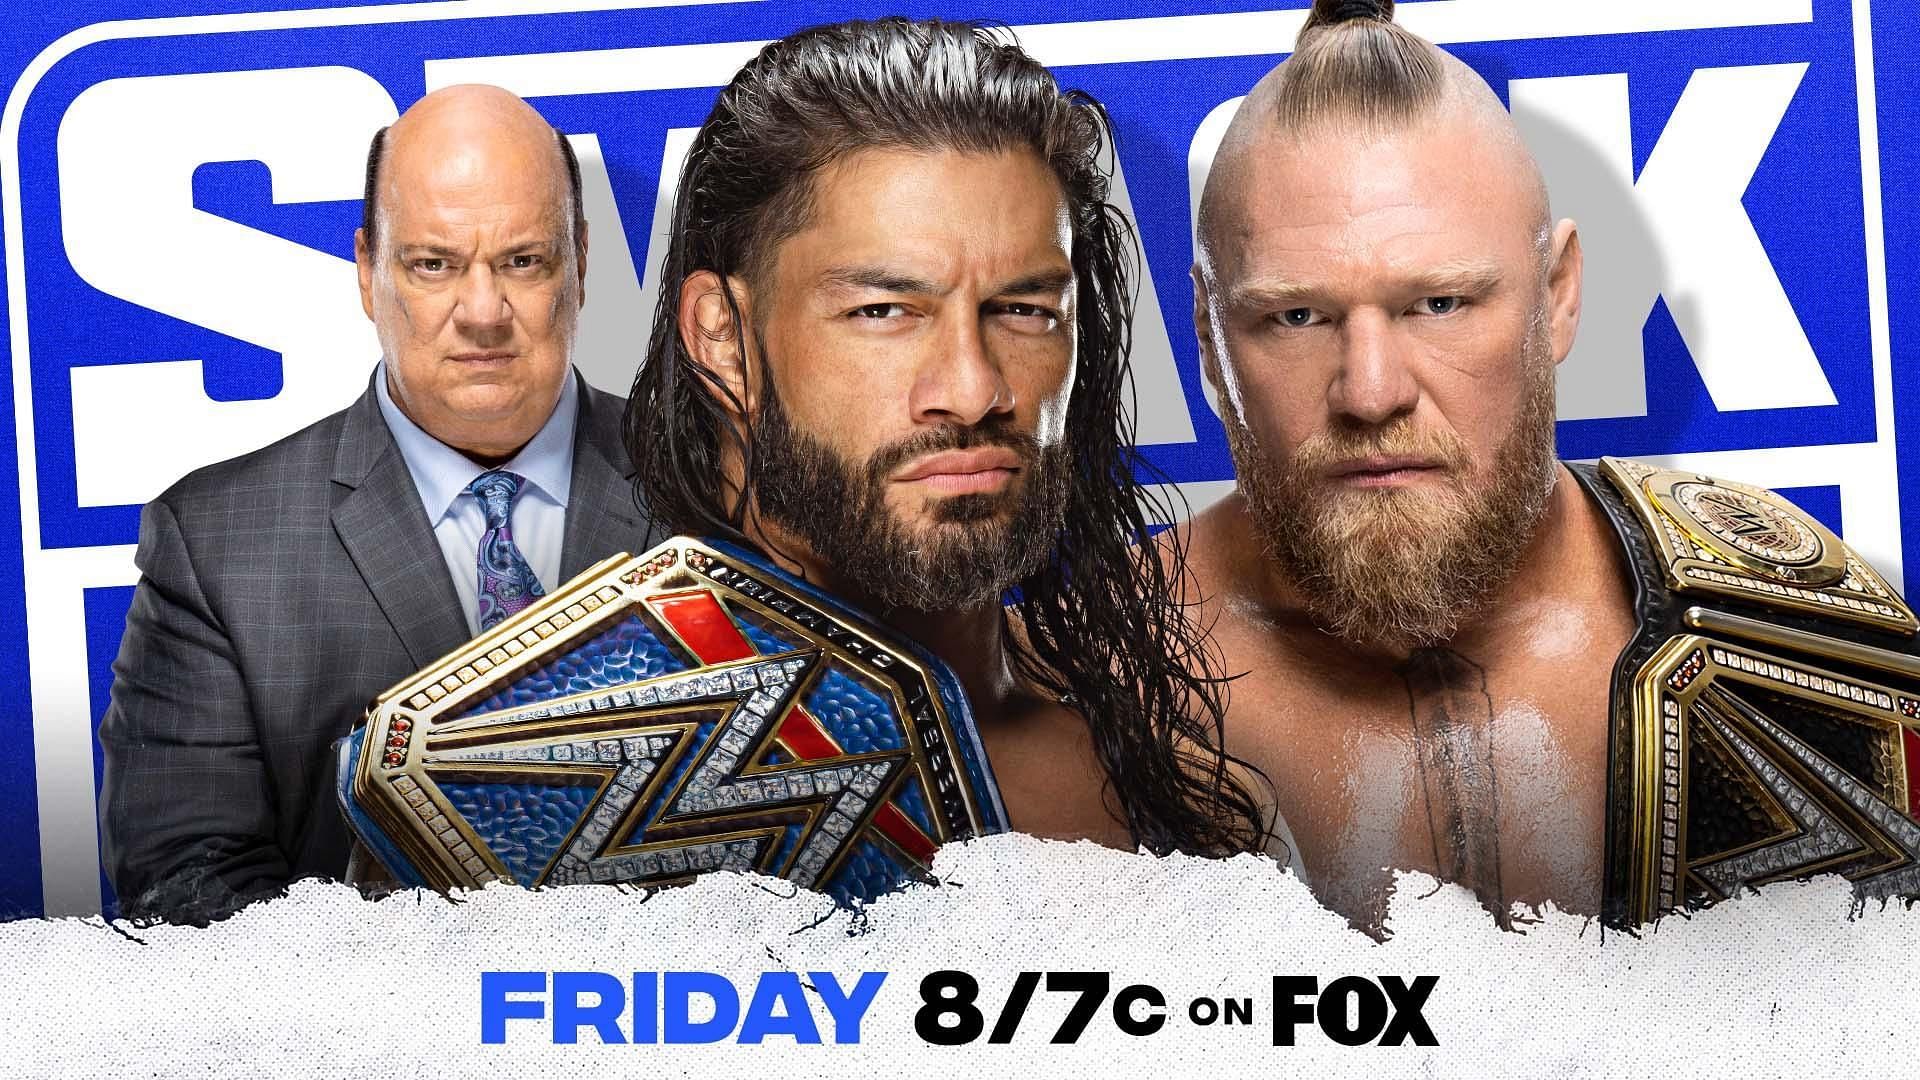 Brock Lesnar and Roman Reigns were advertised to &quot;collide&quot; on SmackDown